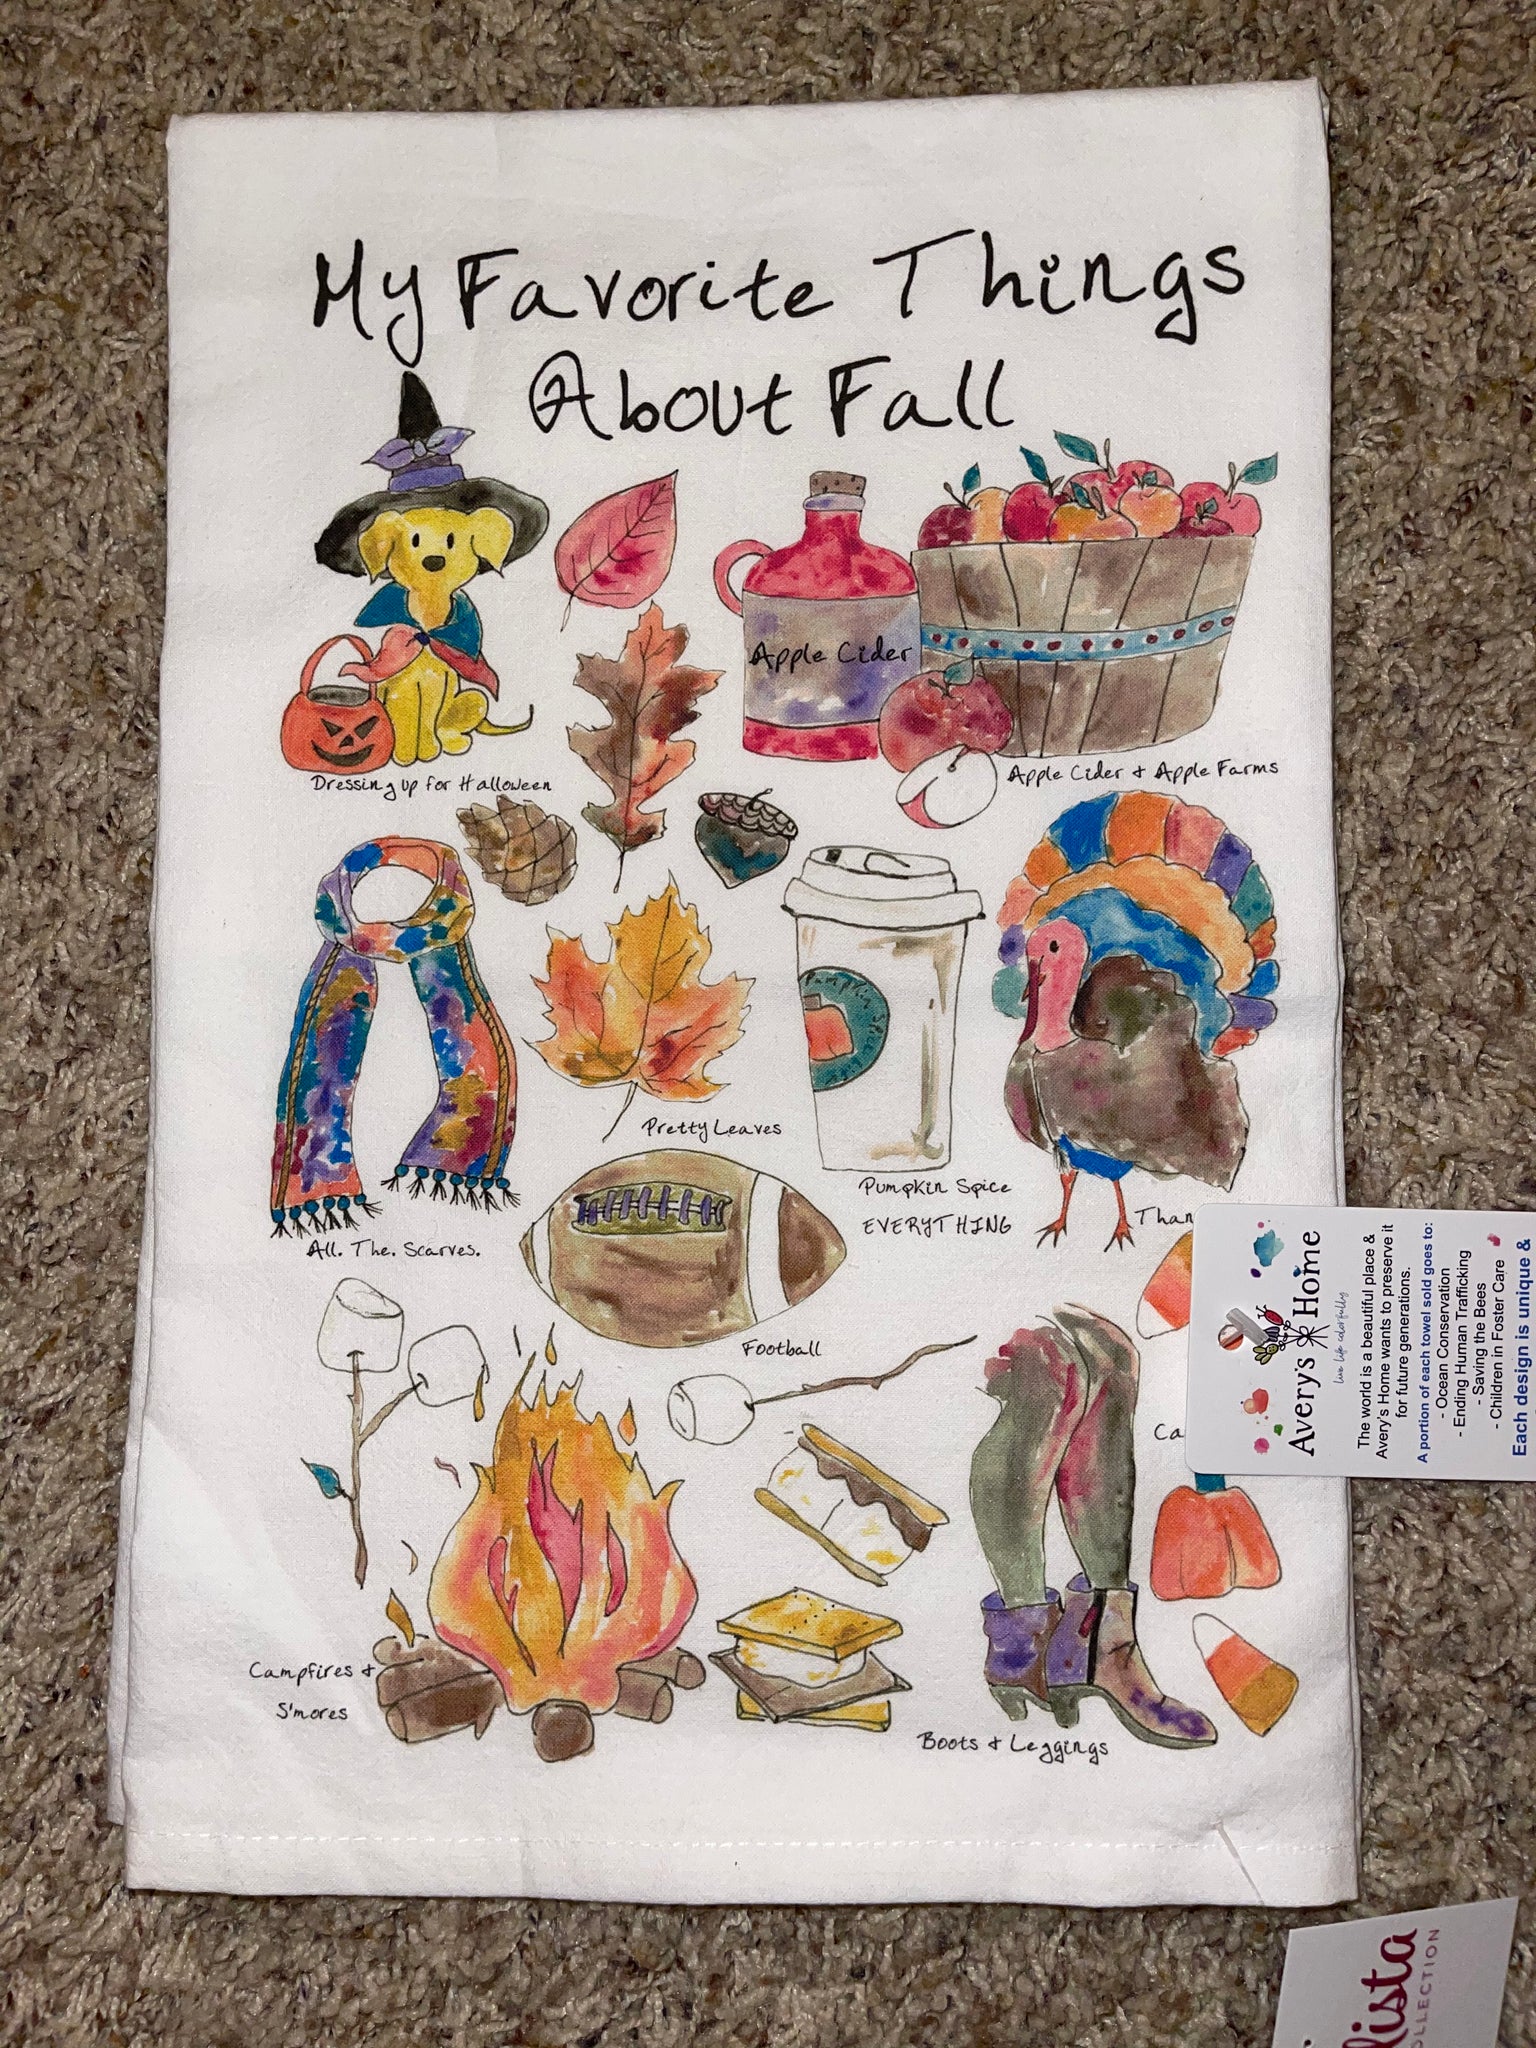 Favorite Things About Fall Tea Towel